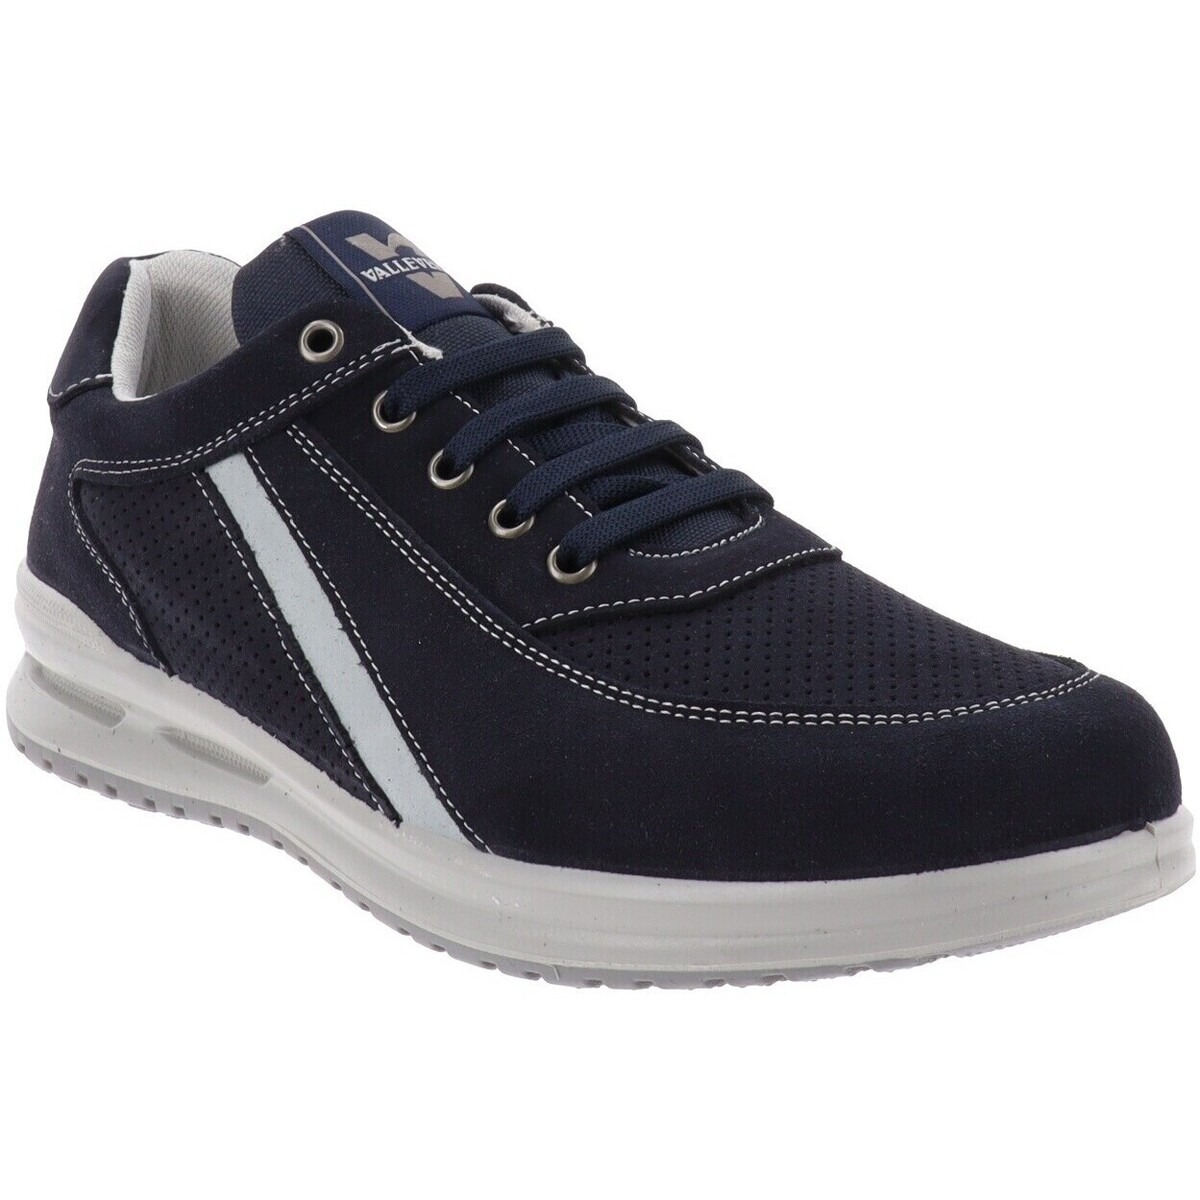 Spartoo Mens Blue Sneakers from Valleverde GOOFASH